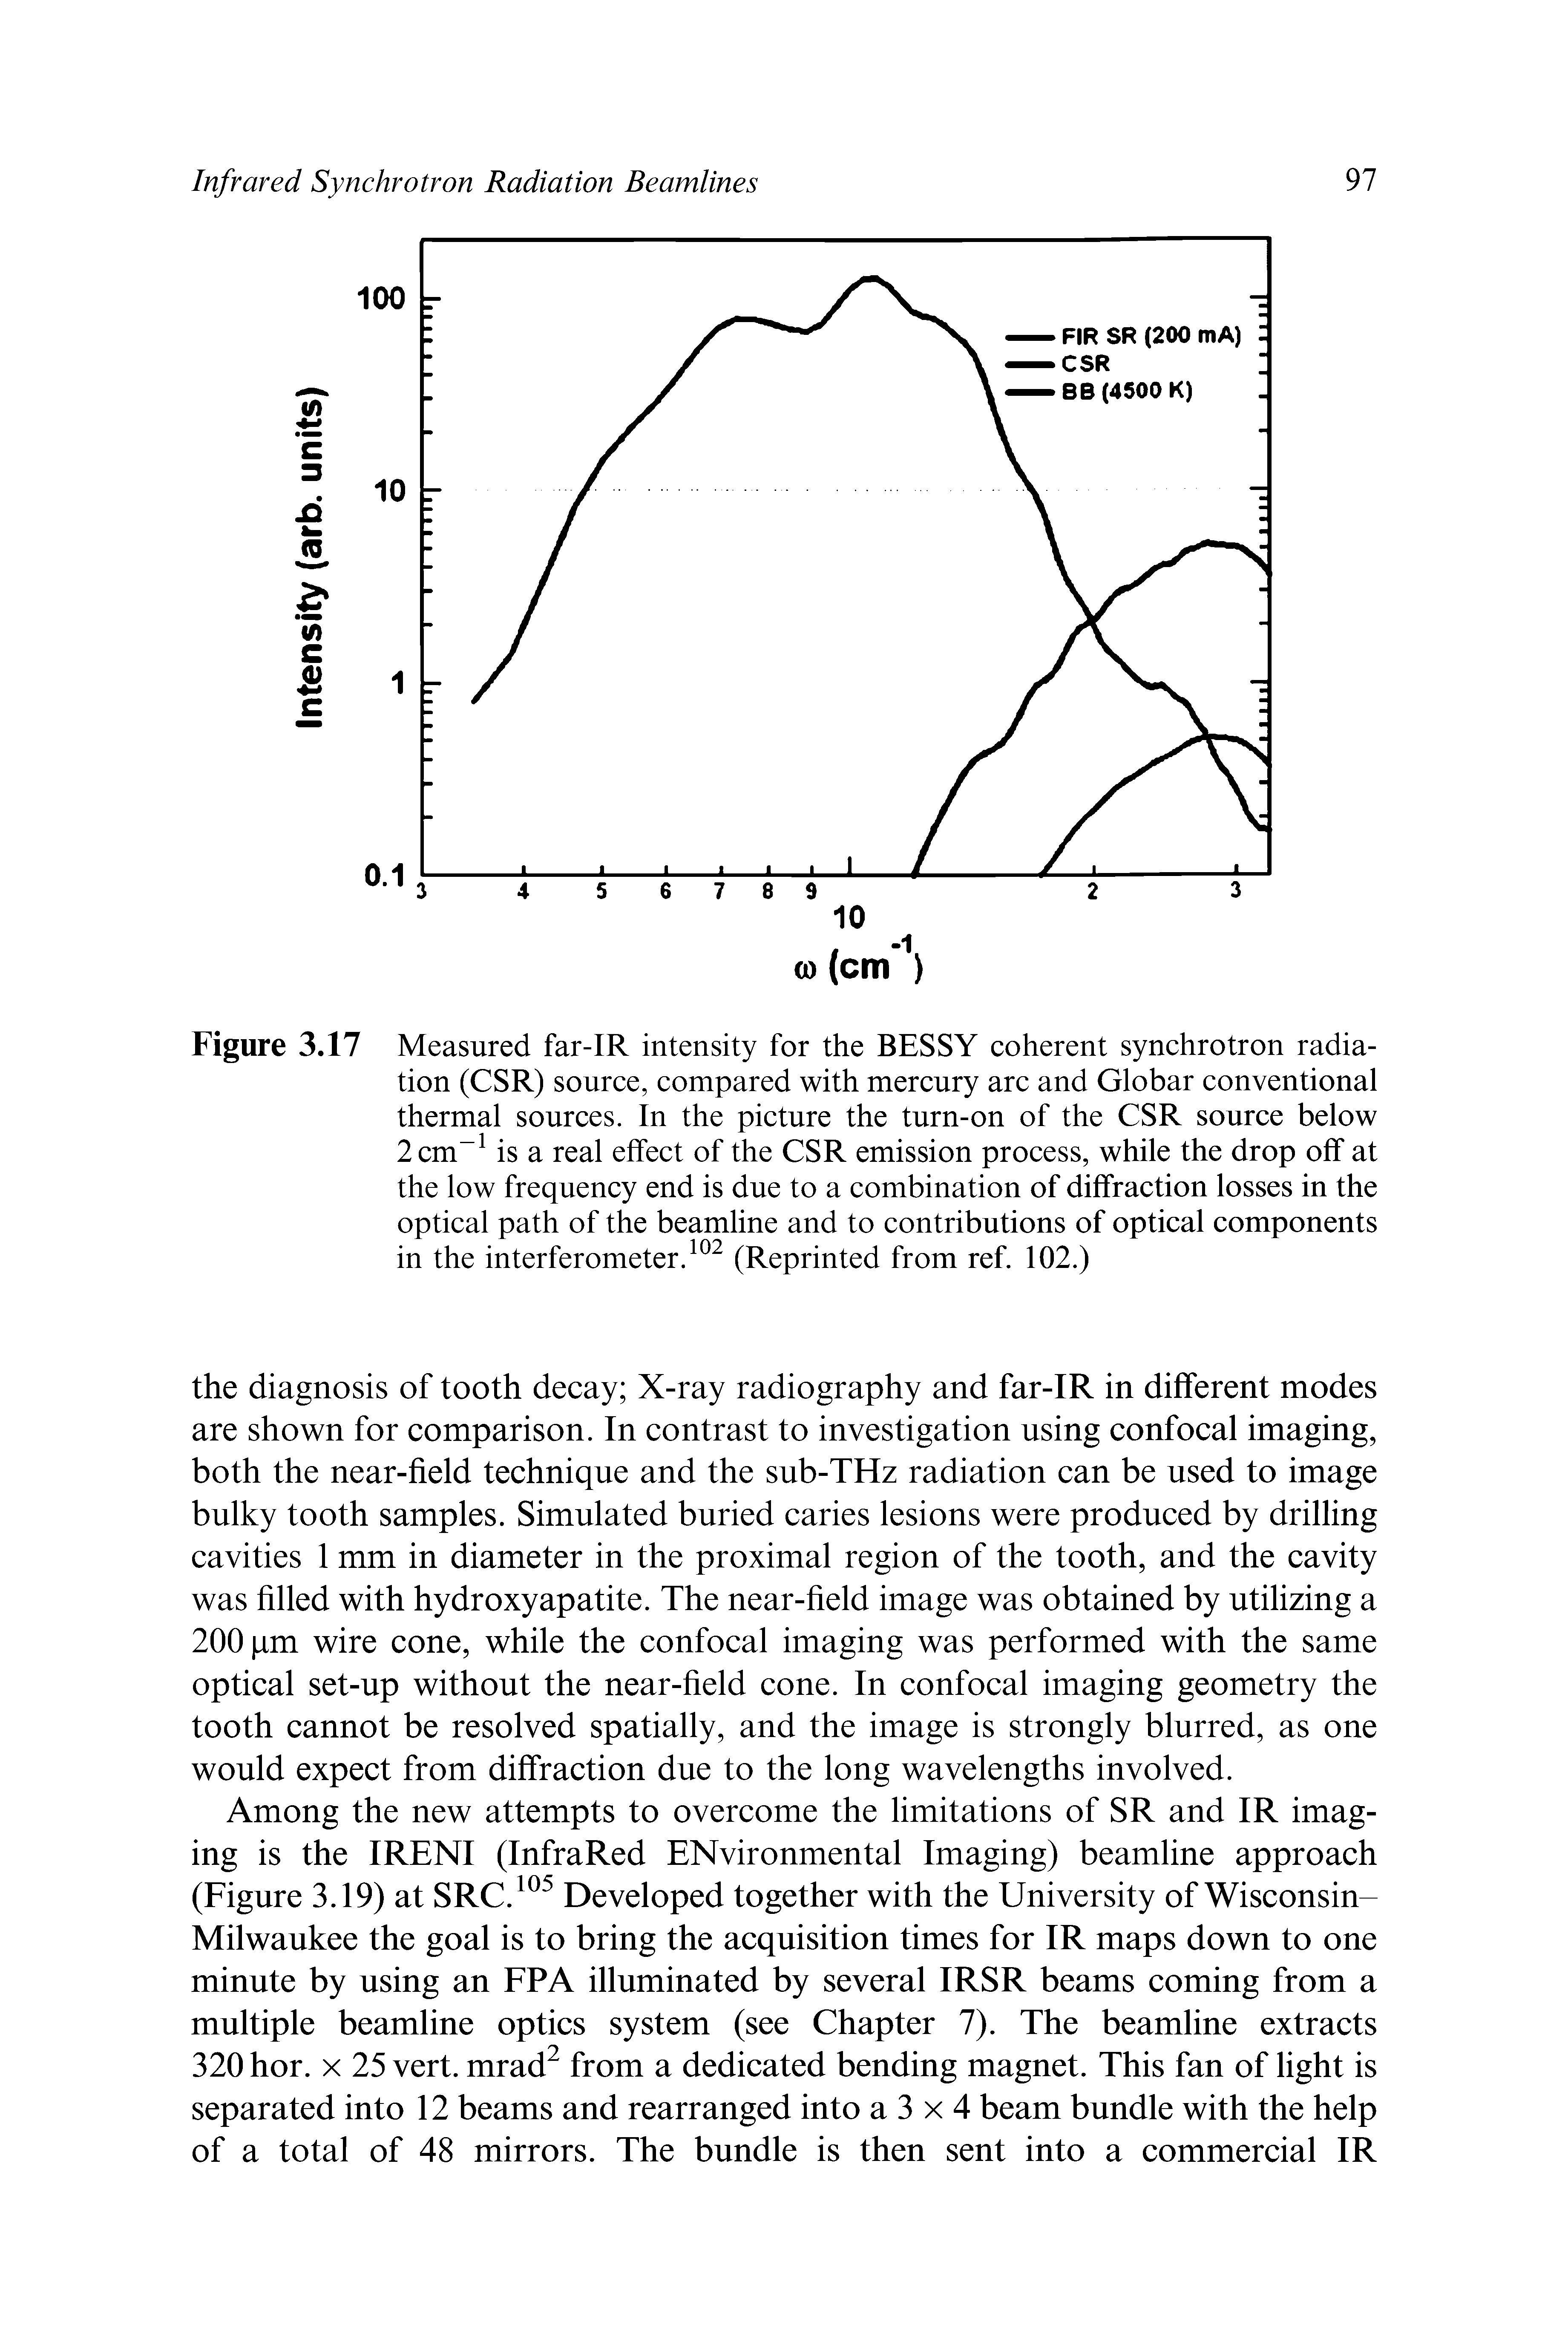 Figure 3.17 Measured far-IR intensity for the BESSY coherent synchrotron radiation (CSR) source, compared with mercury arc and Globar conventional thermal sources. In the picture the turn-on of the CSR source below 2cm is a real effect of the CSR emission process, while the drop off at the low frequency end is due to a combination of diffraction losses in the optical path of the beamline and to contributions of optical components in the interferometer. (Reprinted from ref. 102.)...